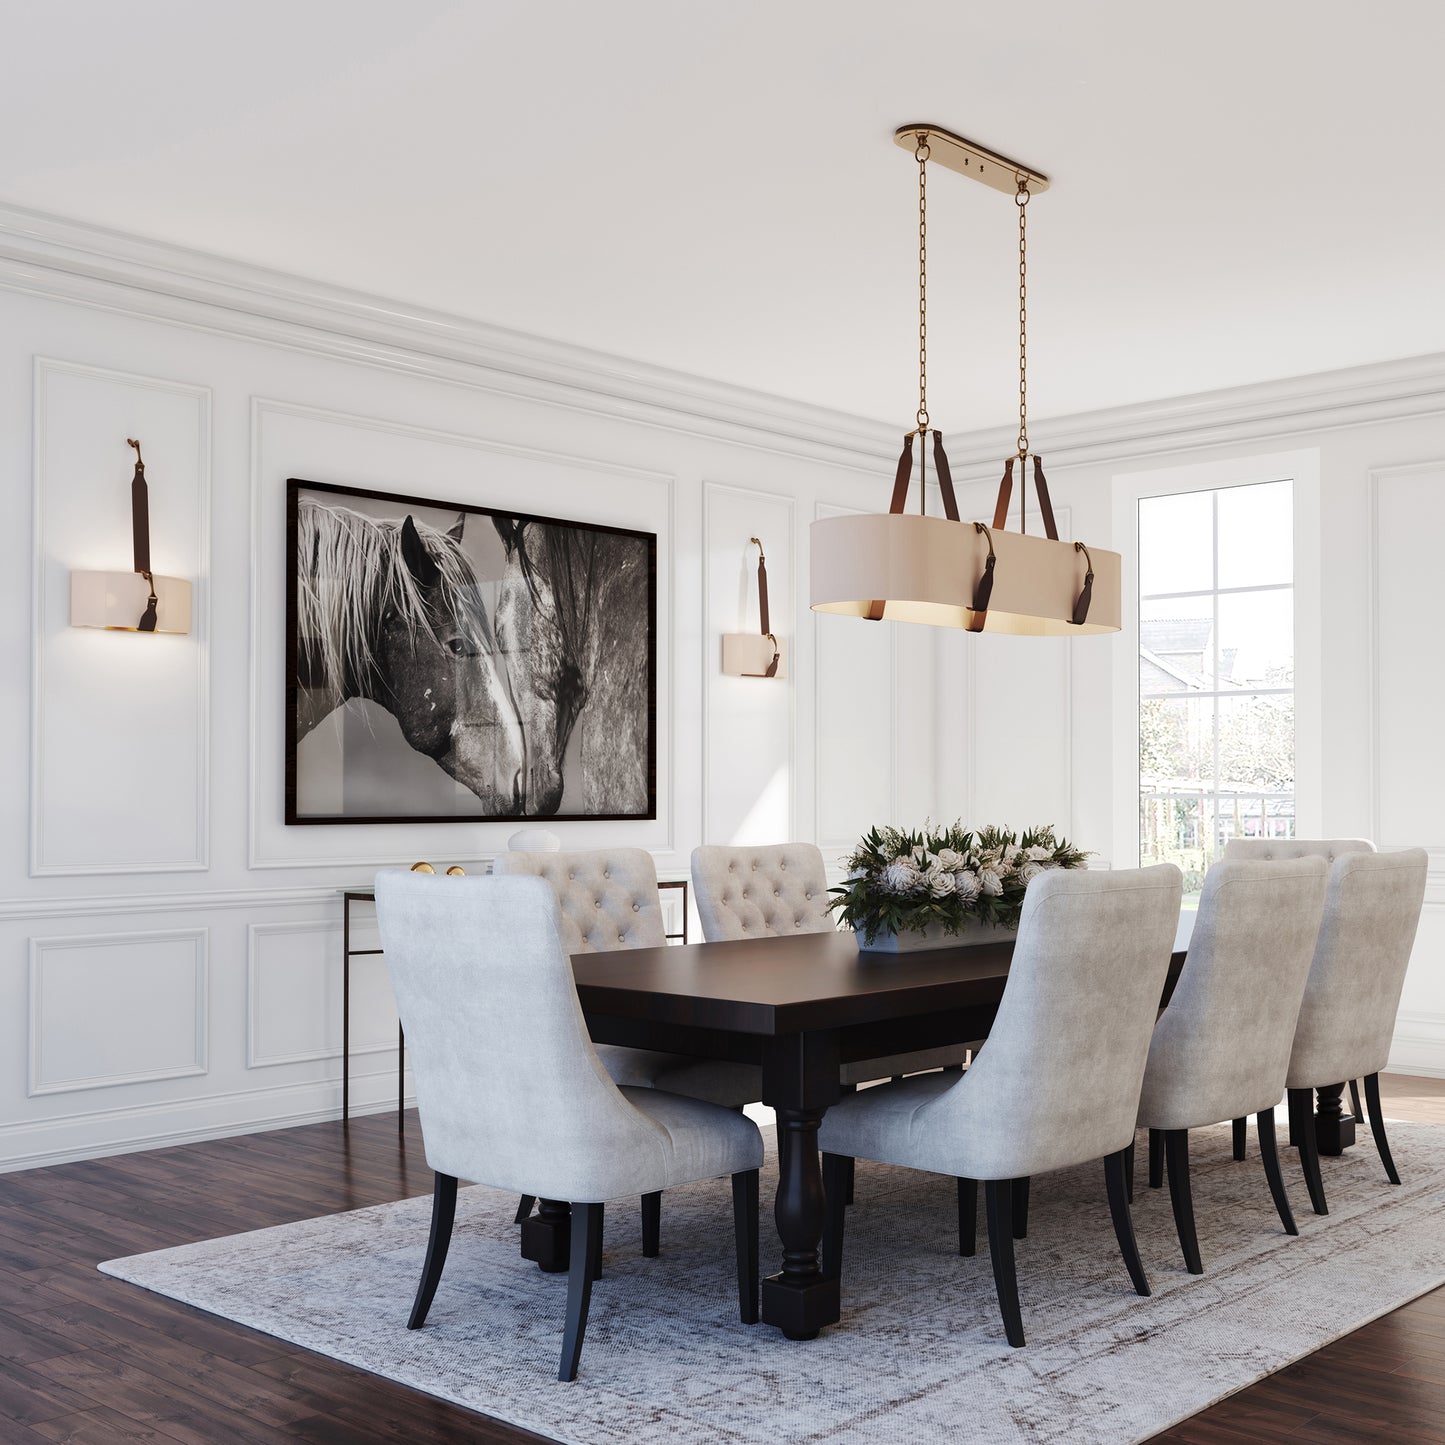 A modern dining room featuring a dark wood table surrounded by light gray upholstered chairs, a Saratoga Oval Pendant from Hubbardton Forge above, and a large black and white photograph on the wall.